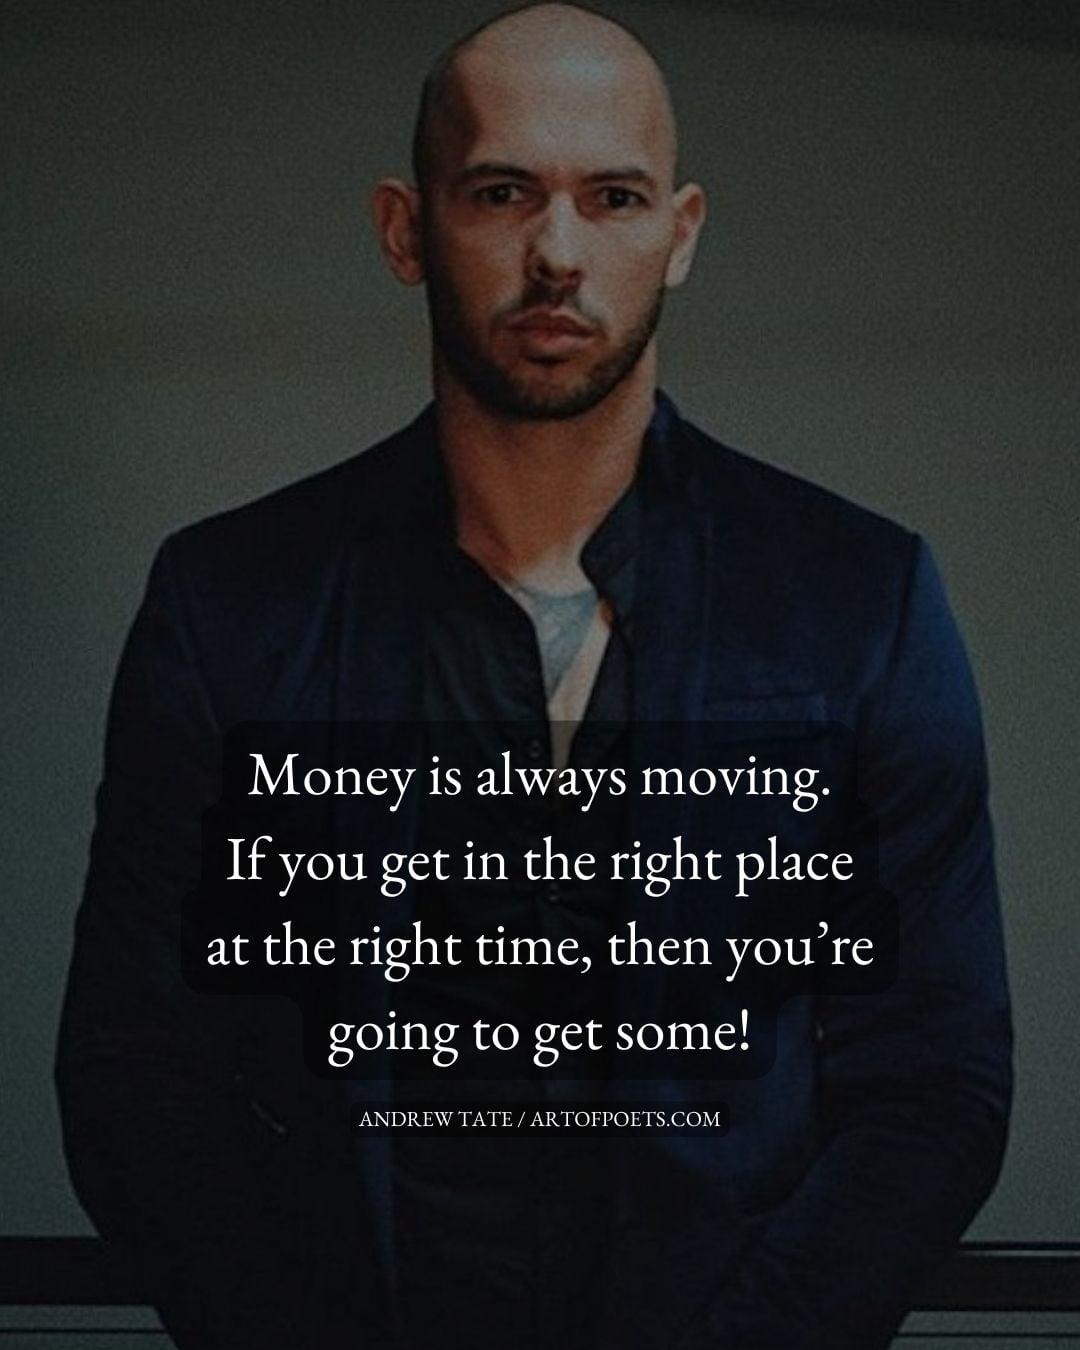 Money is always moving. If you get in the right place at the right time then youre going to get some 1